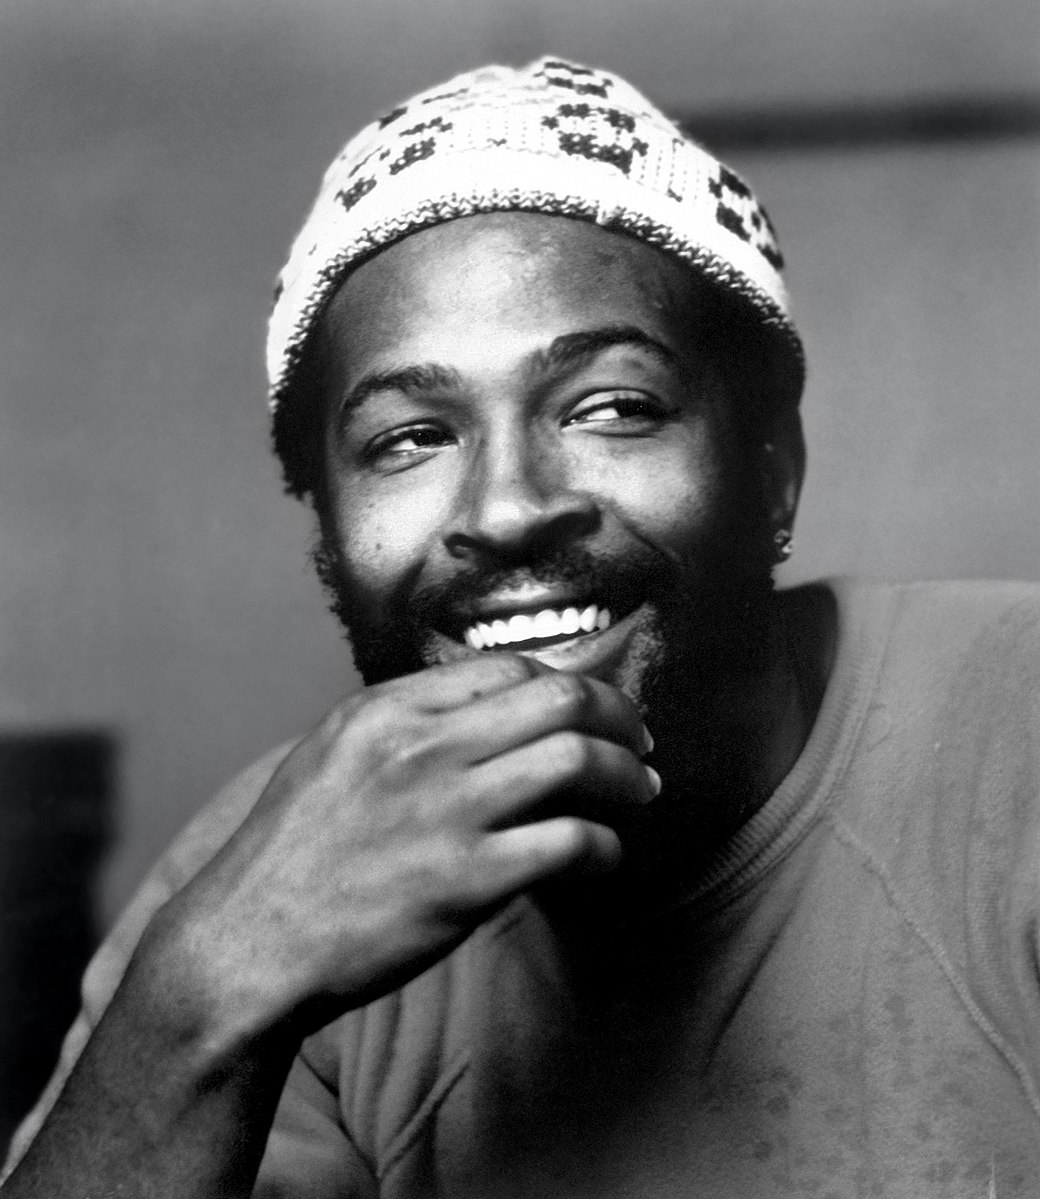 Marvin Gaye - What's Going On? [Legacy Collection]